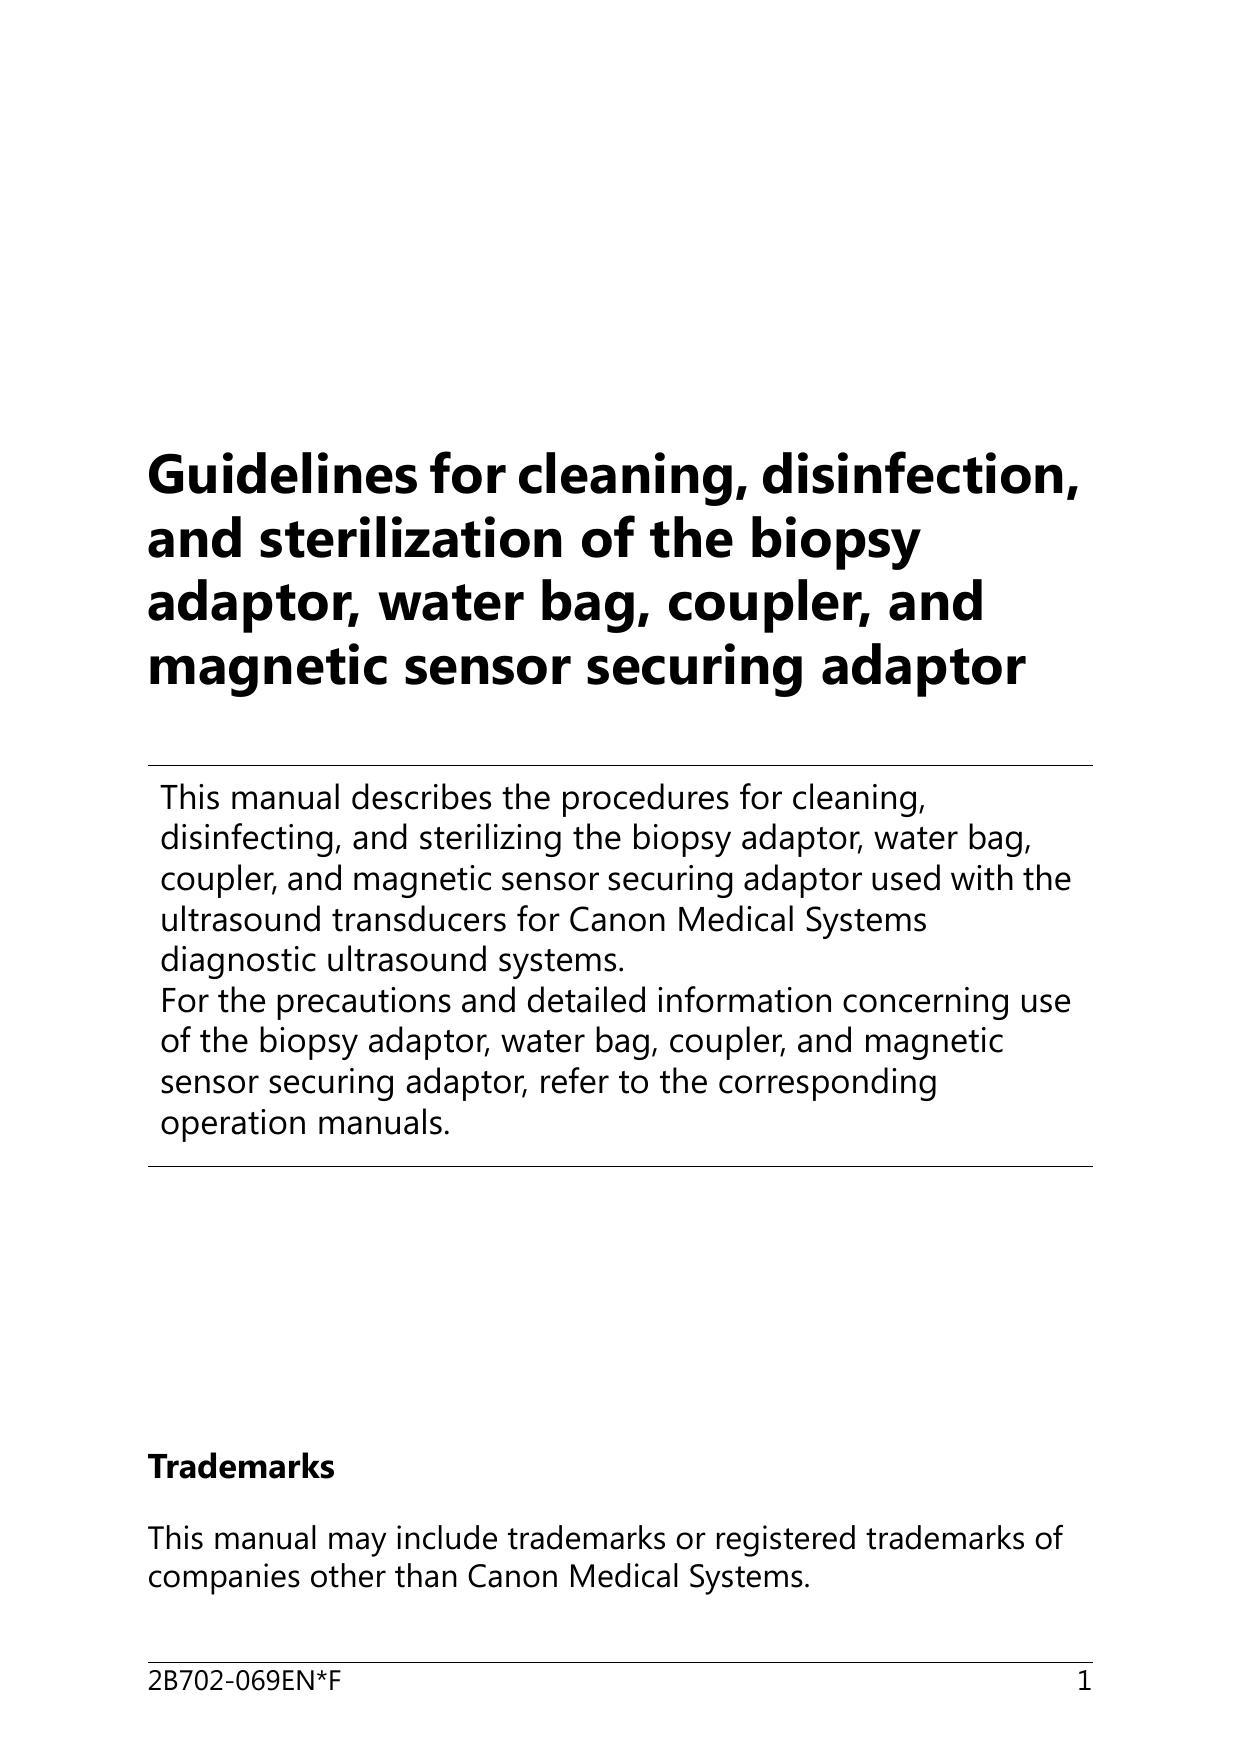 guidelines-for-cleaning-disinfection-and-sterilization-of-biopsy-adaptor-water-bag-coupler-and-magnetic-sensor-securing-adaptor.pdf